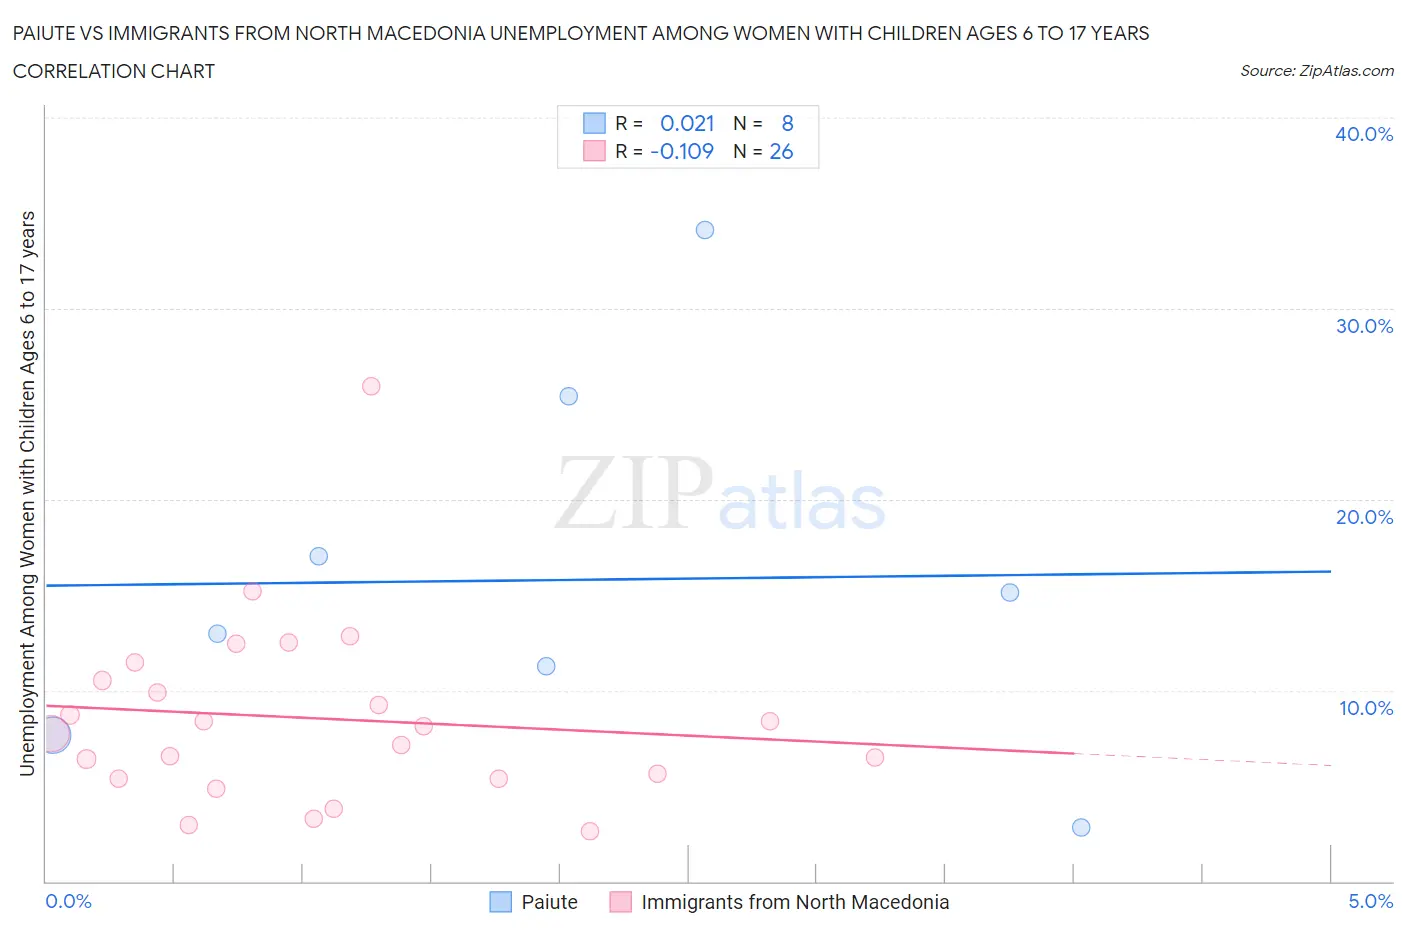 Paiute vs Immigrants from North Macedonia Unemployment Among Women with Children Ages 6 to 17 years